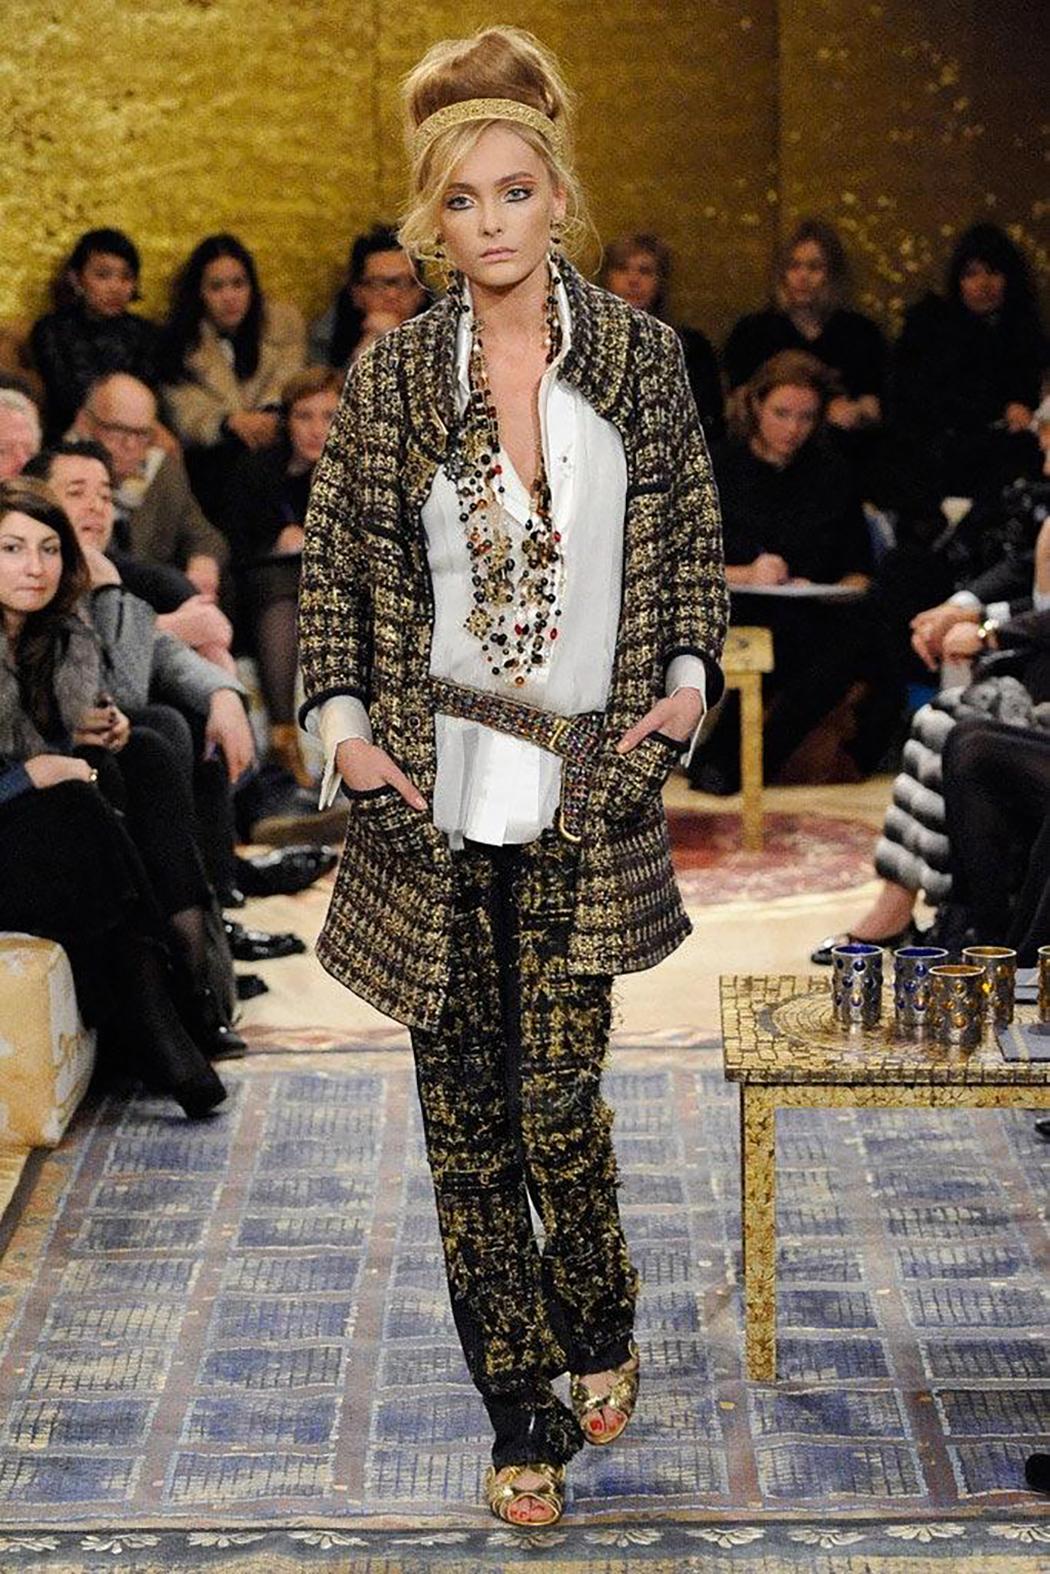 Very famous Chanel coat from Runway of Paris / BYZANCE Metiers d'Art Collection, 2011 Pre-Fall by Karl Lagerfeld. 
Retail price ca. 10,000$ 
As seen Aurdrey Tautou and many other celebs and magazine covers. 
- made of softest wool/cashmere blend